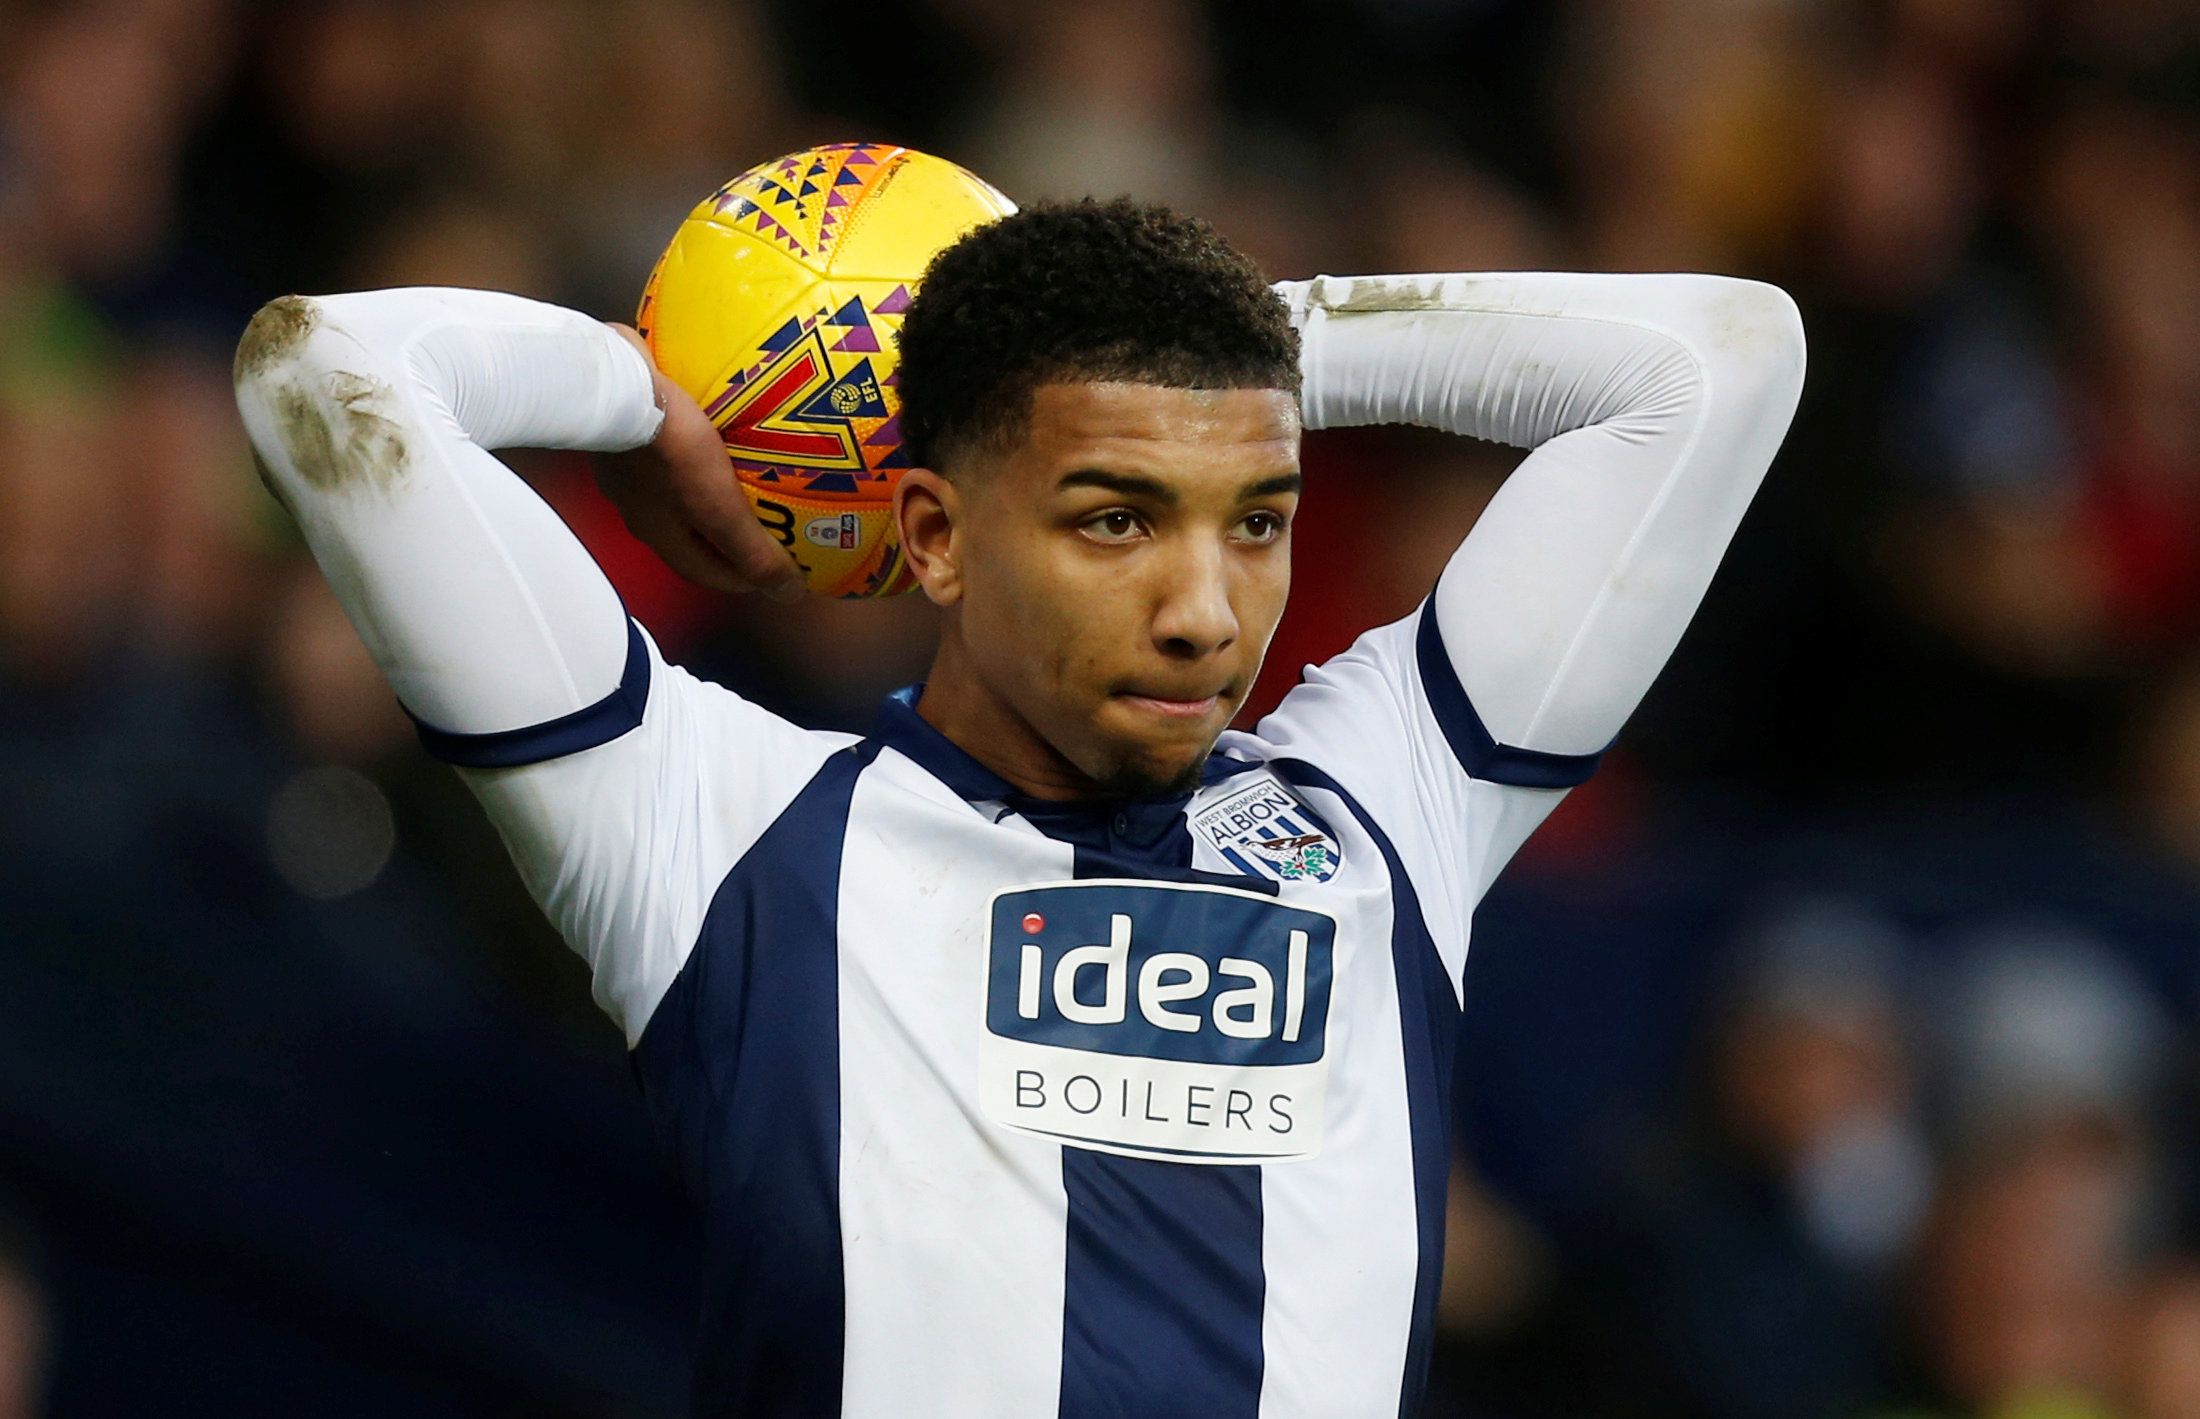 Soccer Football - Championship - West Bromwich Albion v Norwich City - The Hawthorns, West Bromwich, Britain - January 12, 2019  West Bromwich Albion's Mason Holgate    Action Images/Ed Sykes  EDITORIAL USE ONLY. No use with unauthorized audio, video, data, fixture lists, club/league logos or 